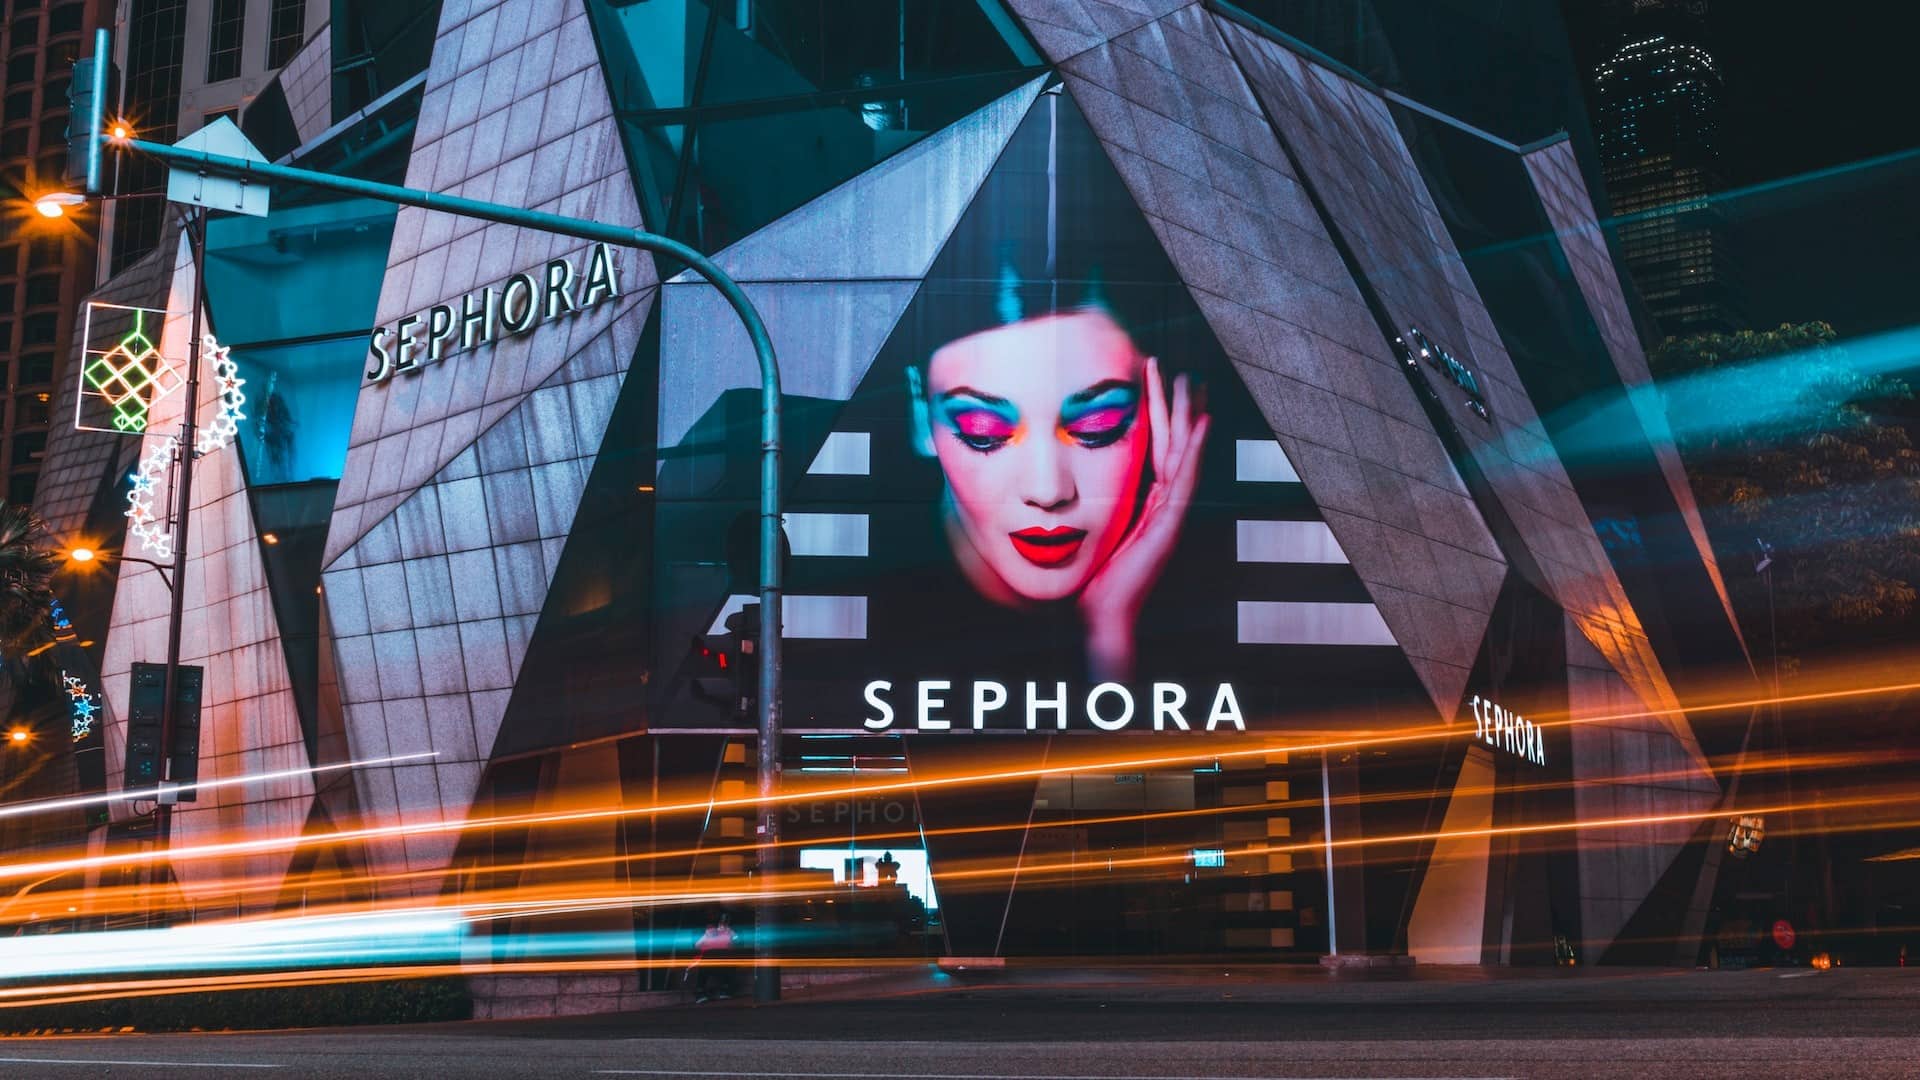 Sephora Competitors and Alternatives featured Image by Deva Darshan